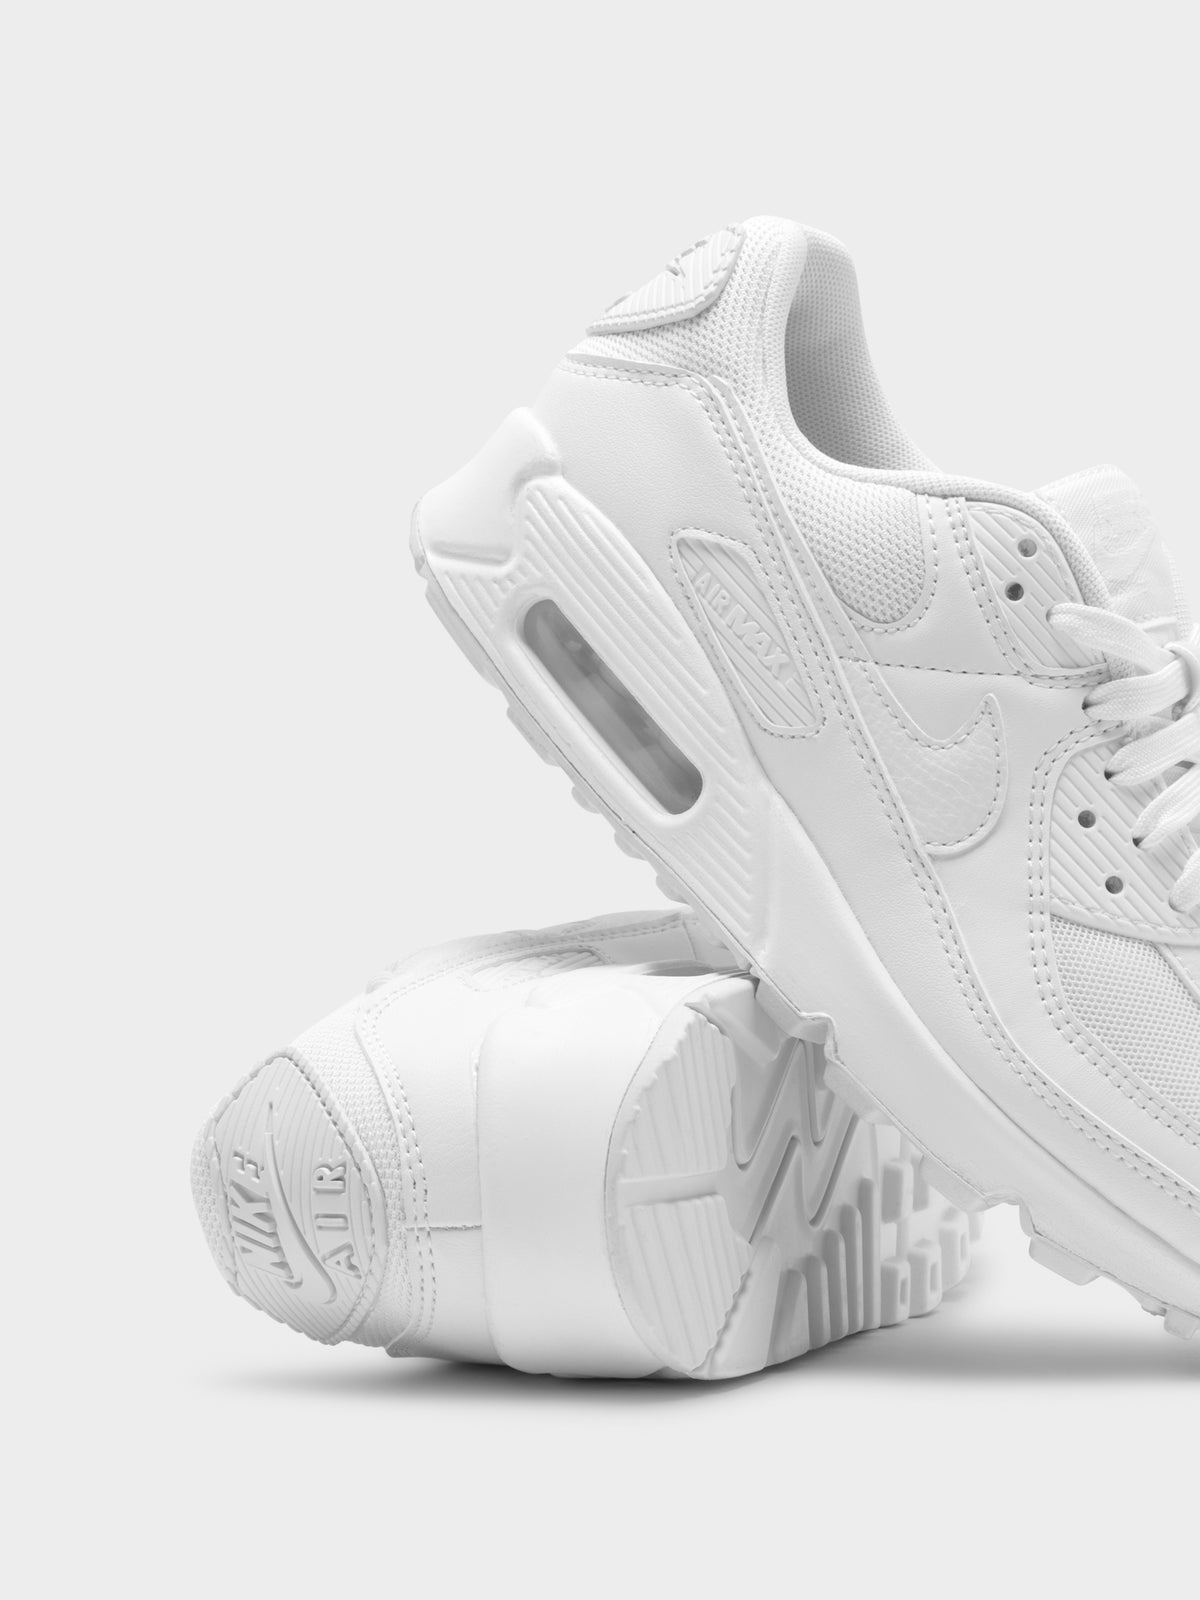 Womens Air Max 90 Sneakers in White